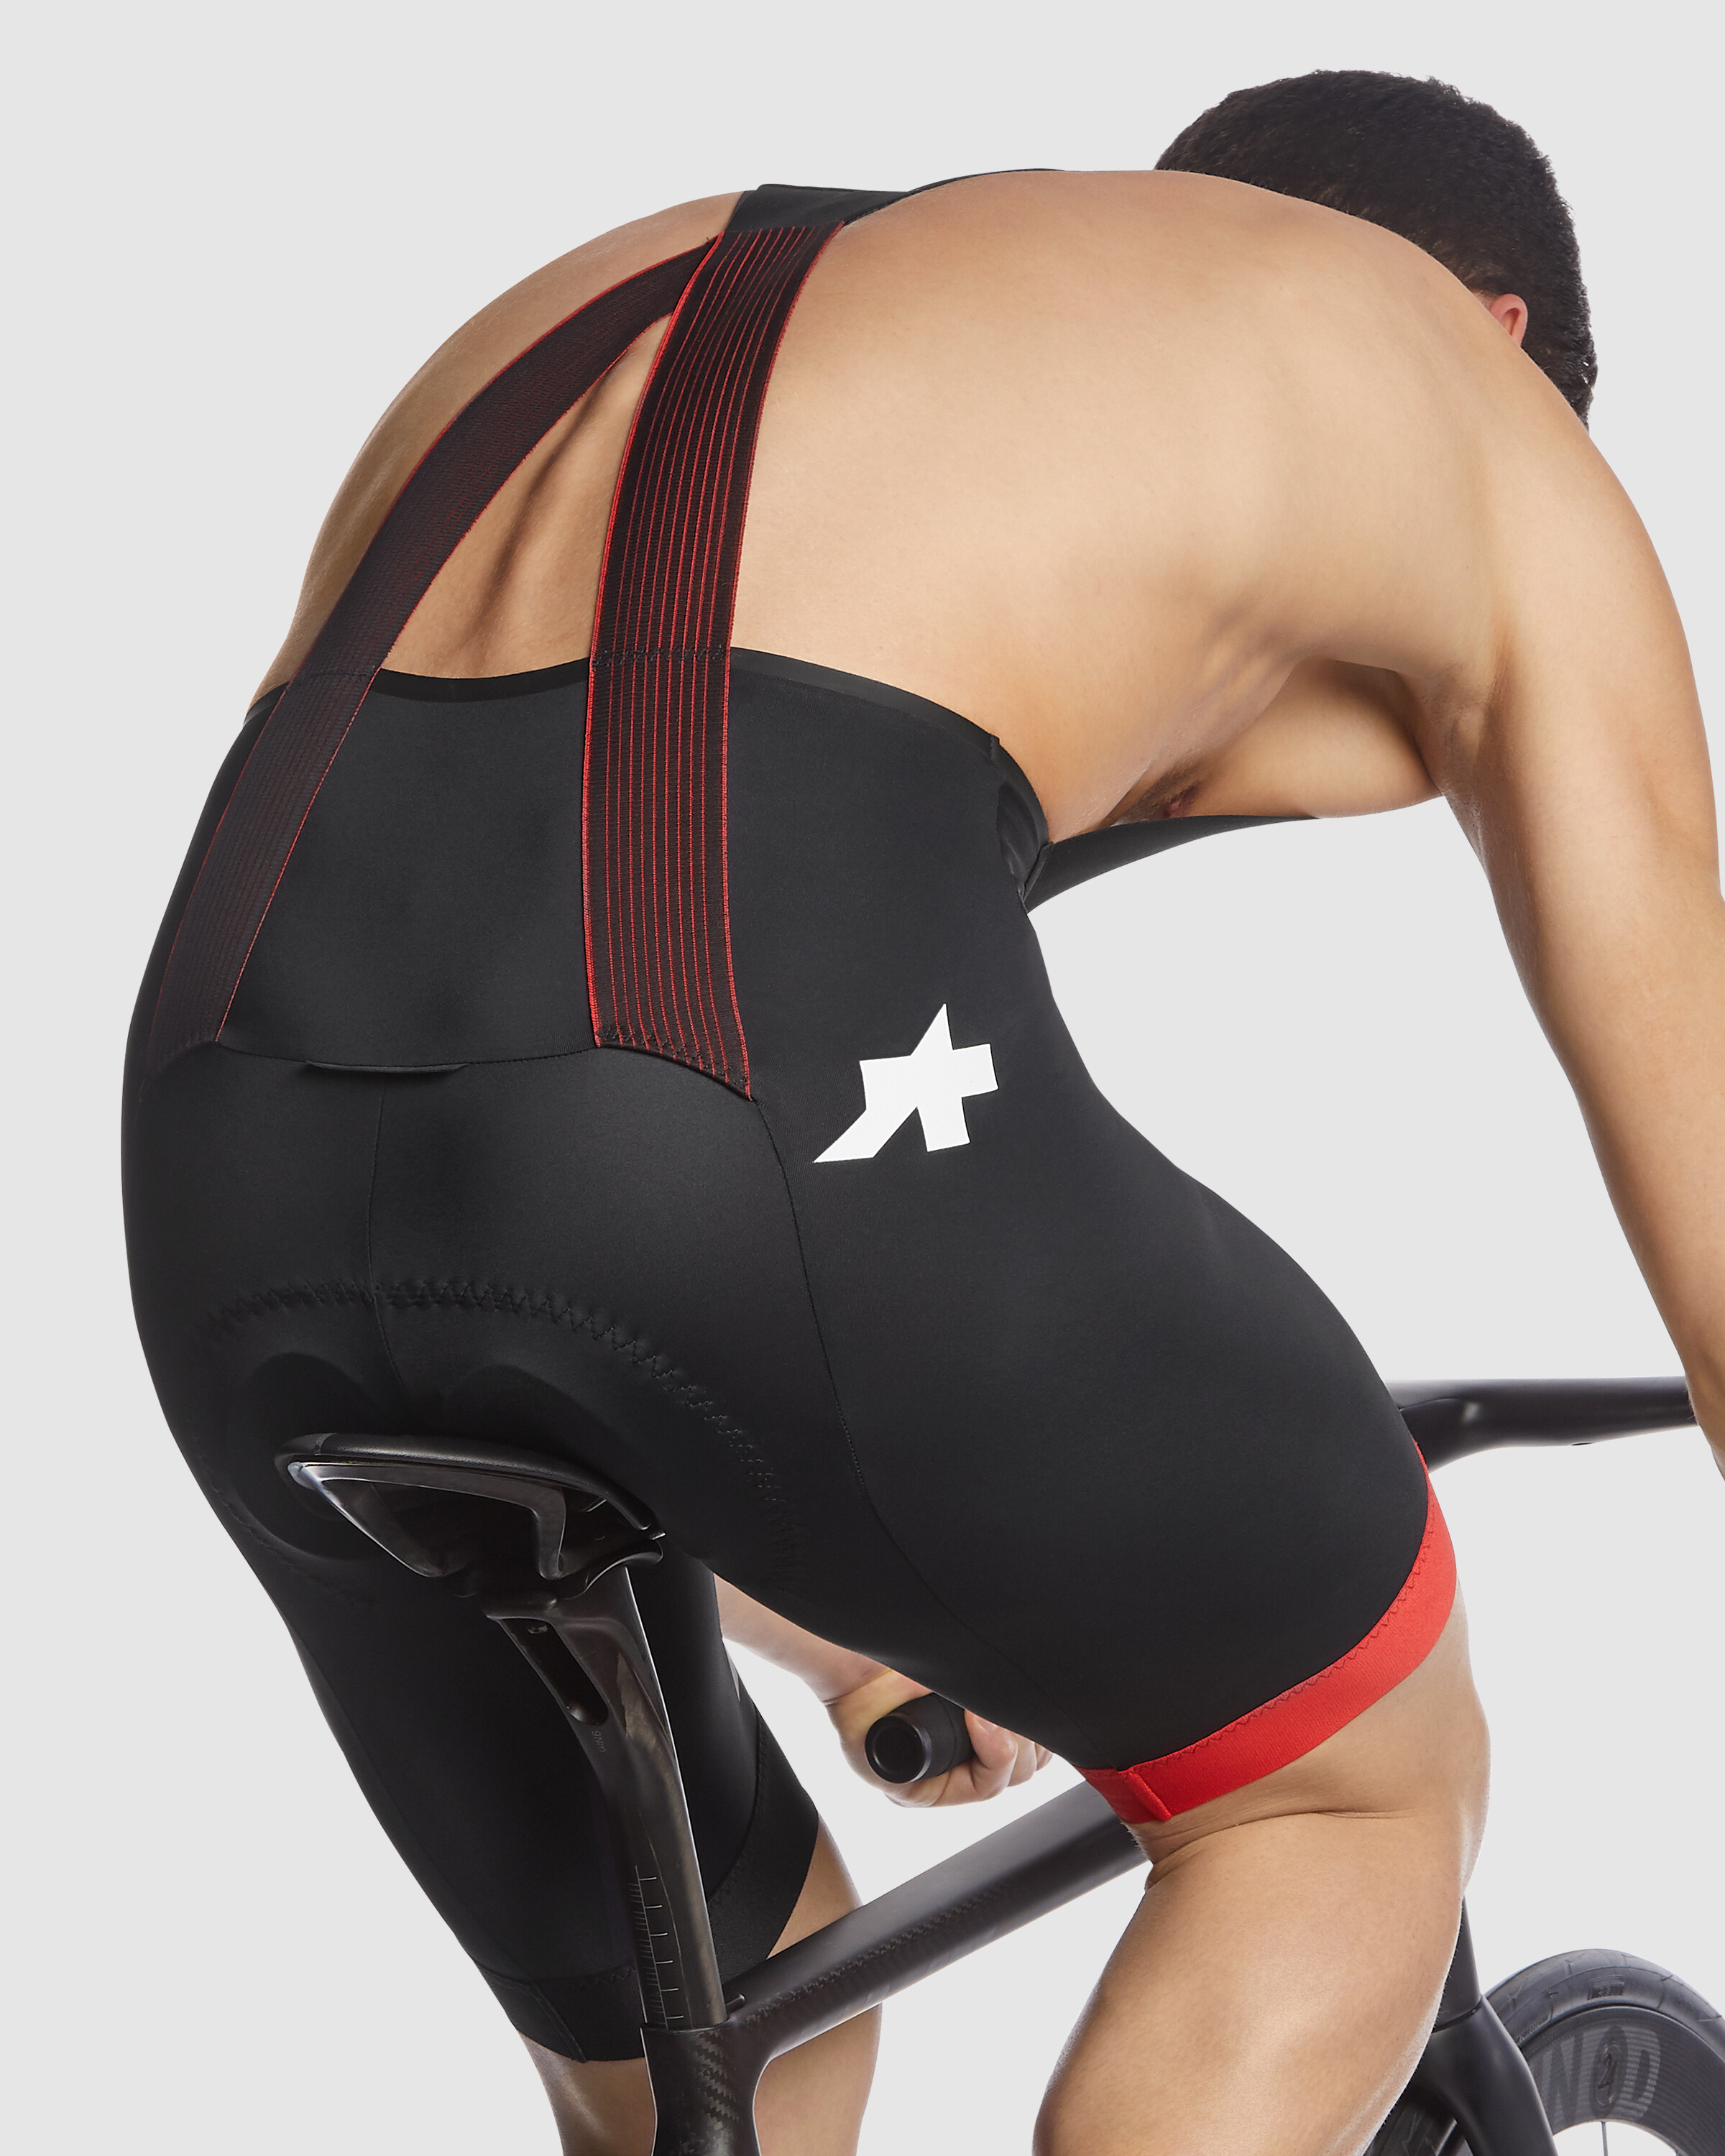 EQUIPE RS Bib Shorts S9 - ASSOS Of Switzerland - Official Outlet